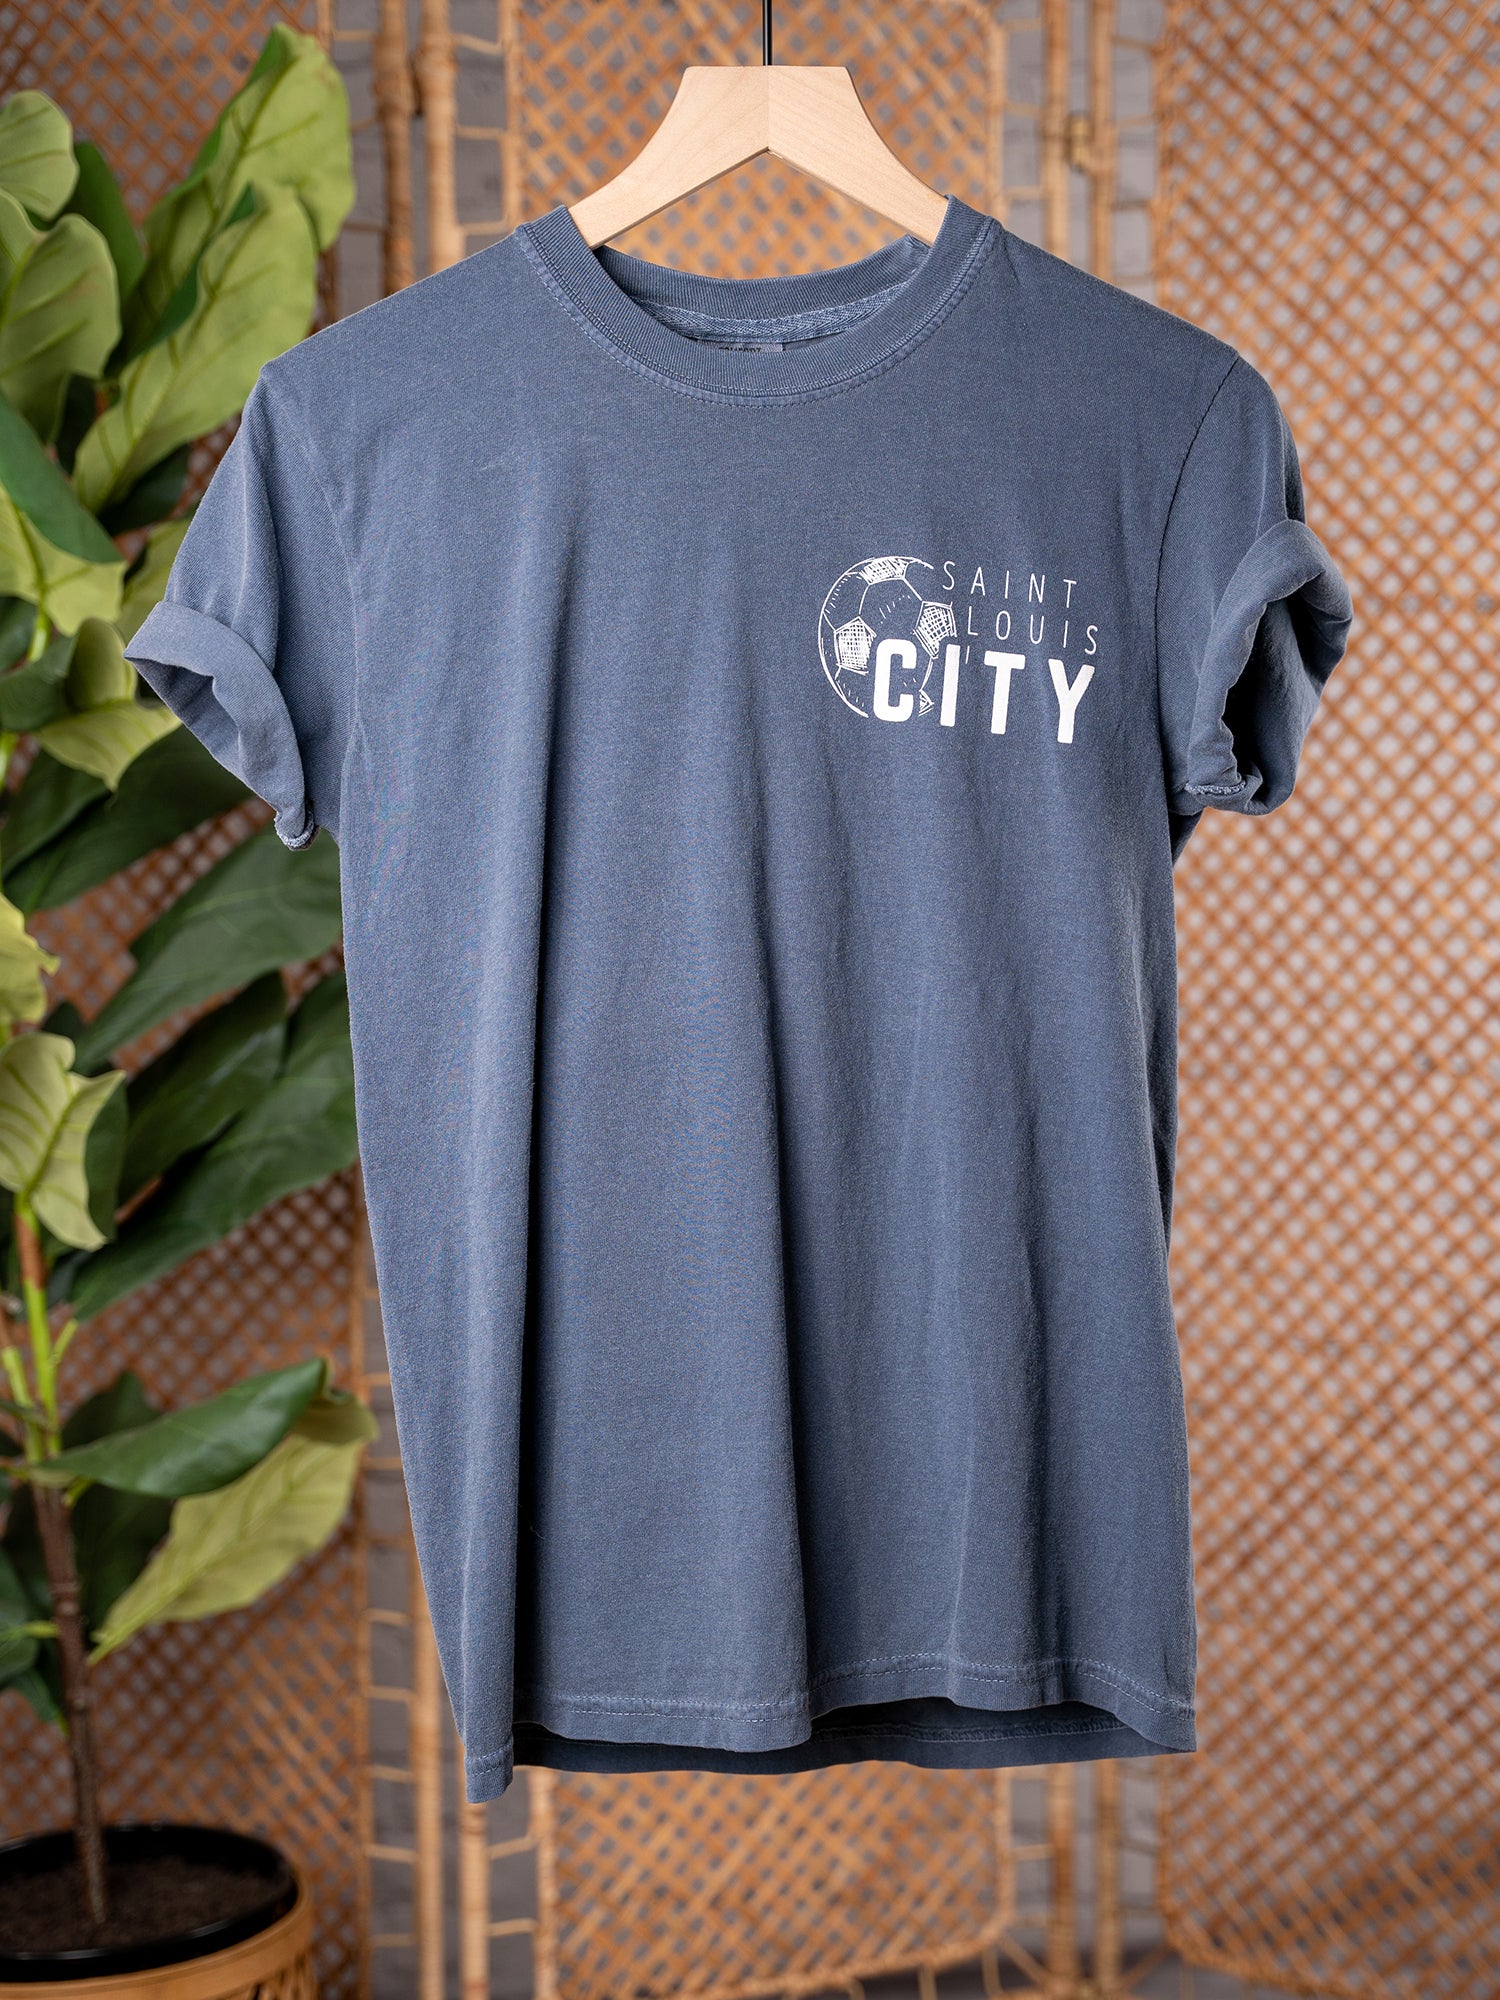 Our City Screen Printed T-shirt and Sweatshirt